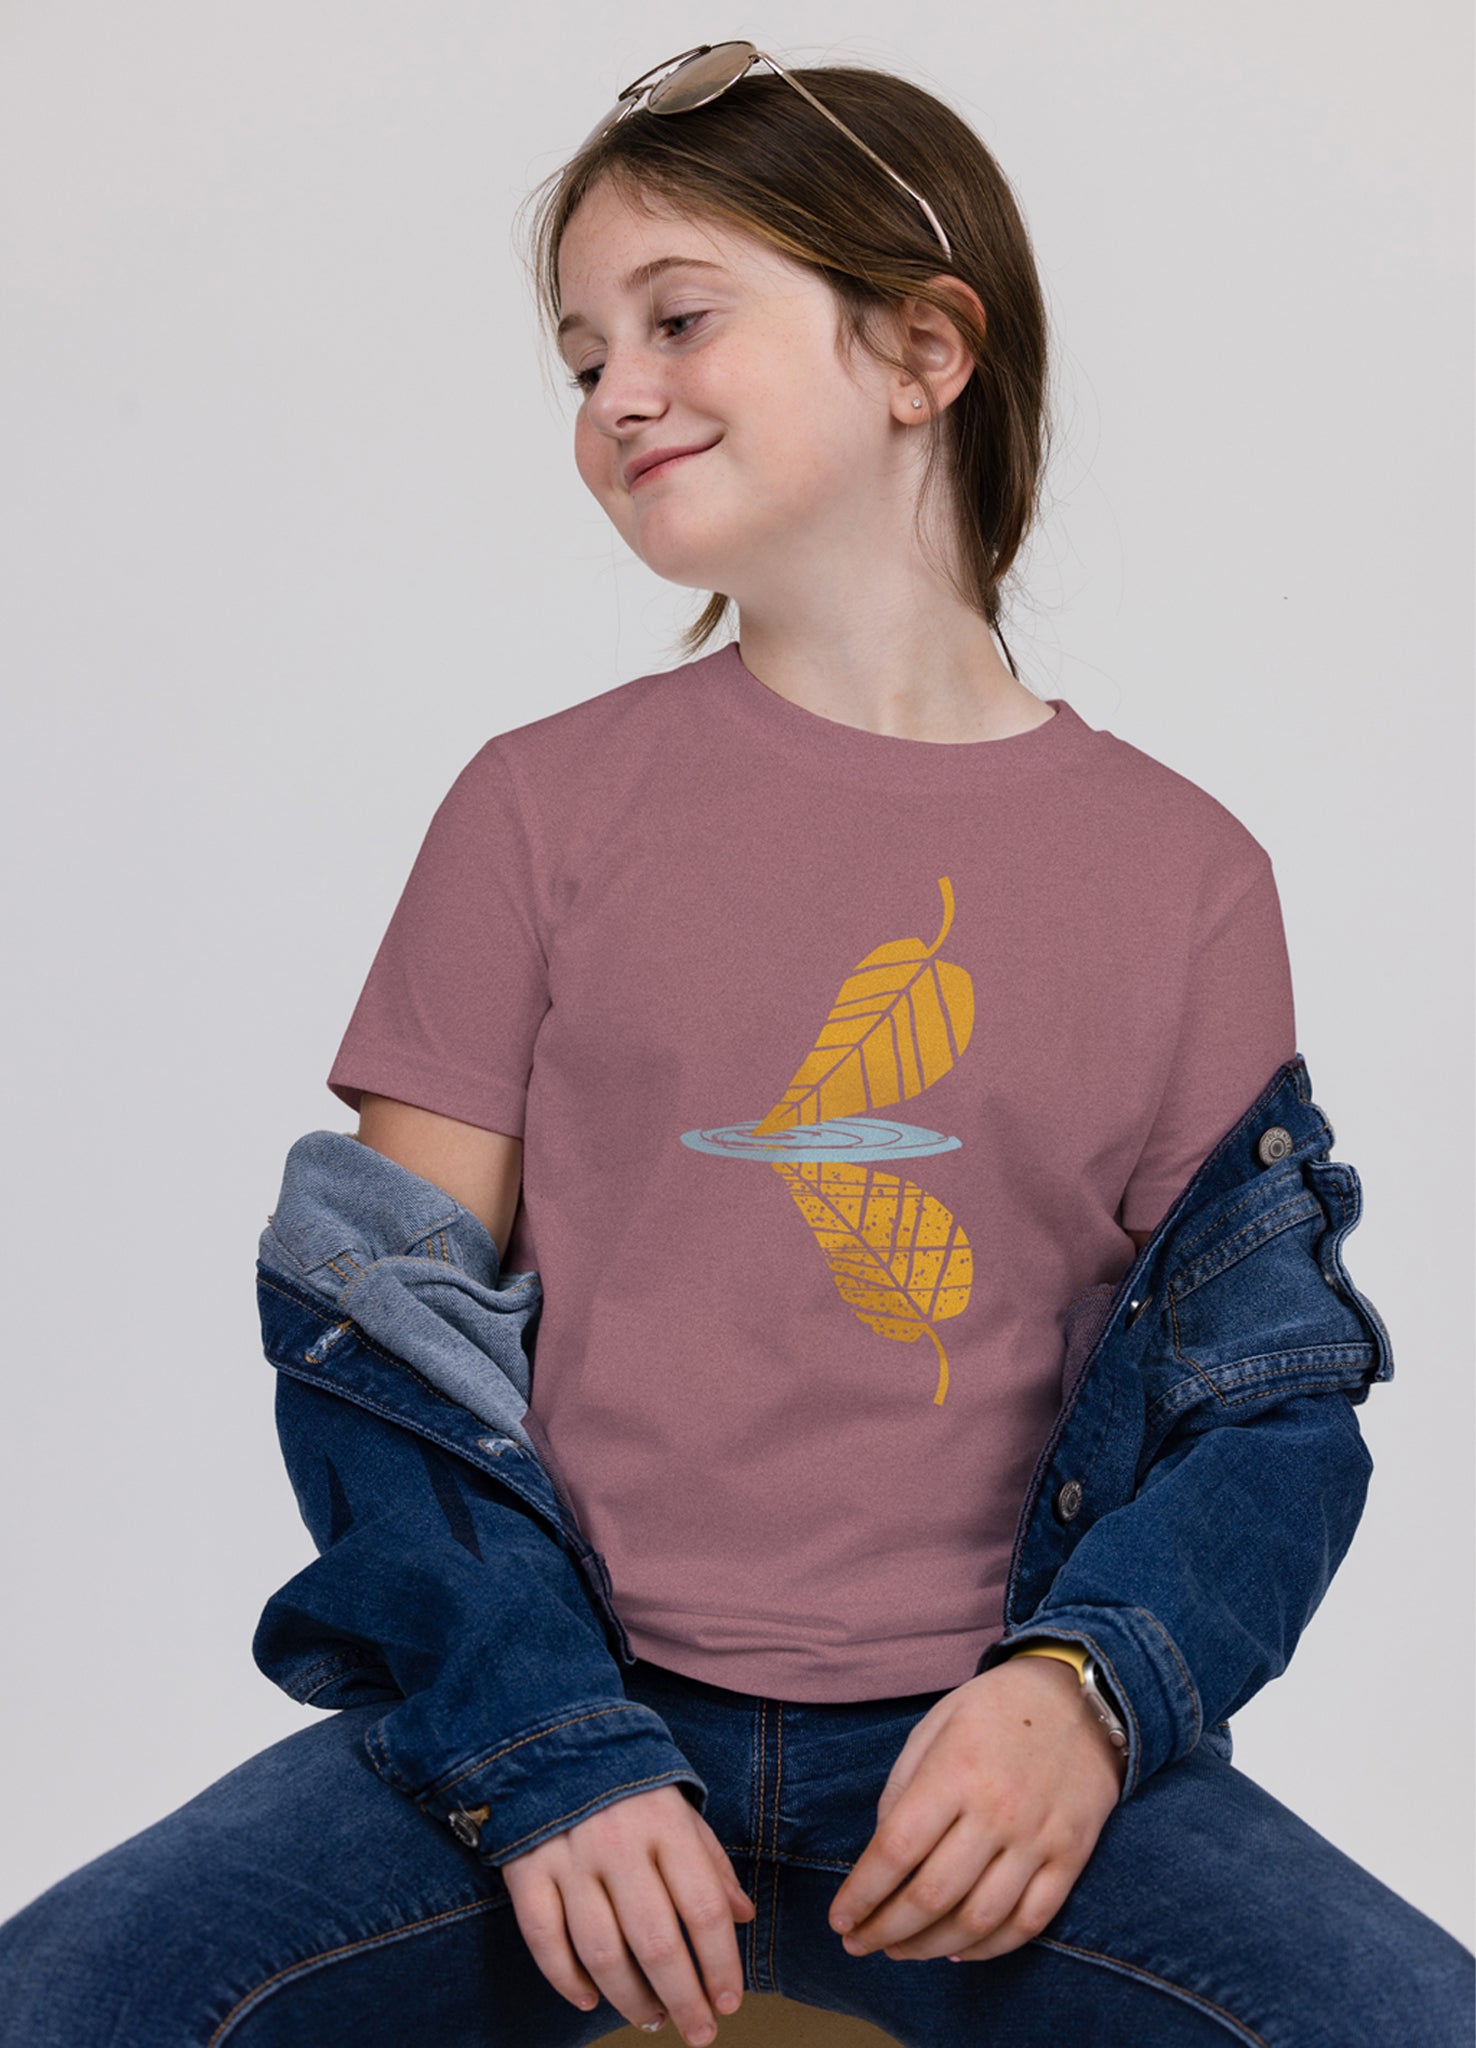 kid's fall t-shirt with leaf design